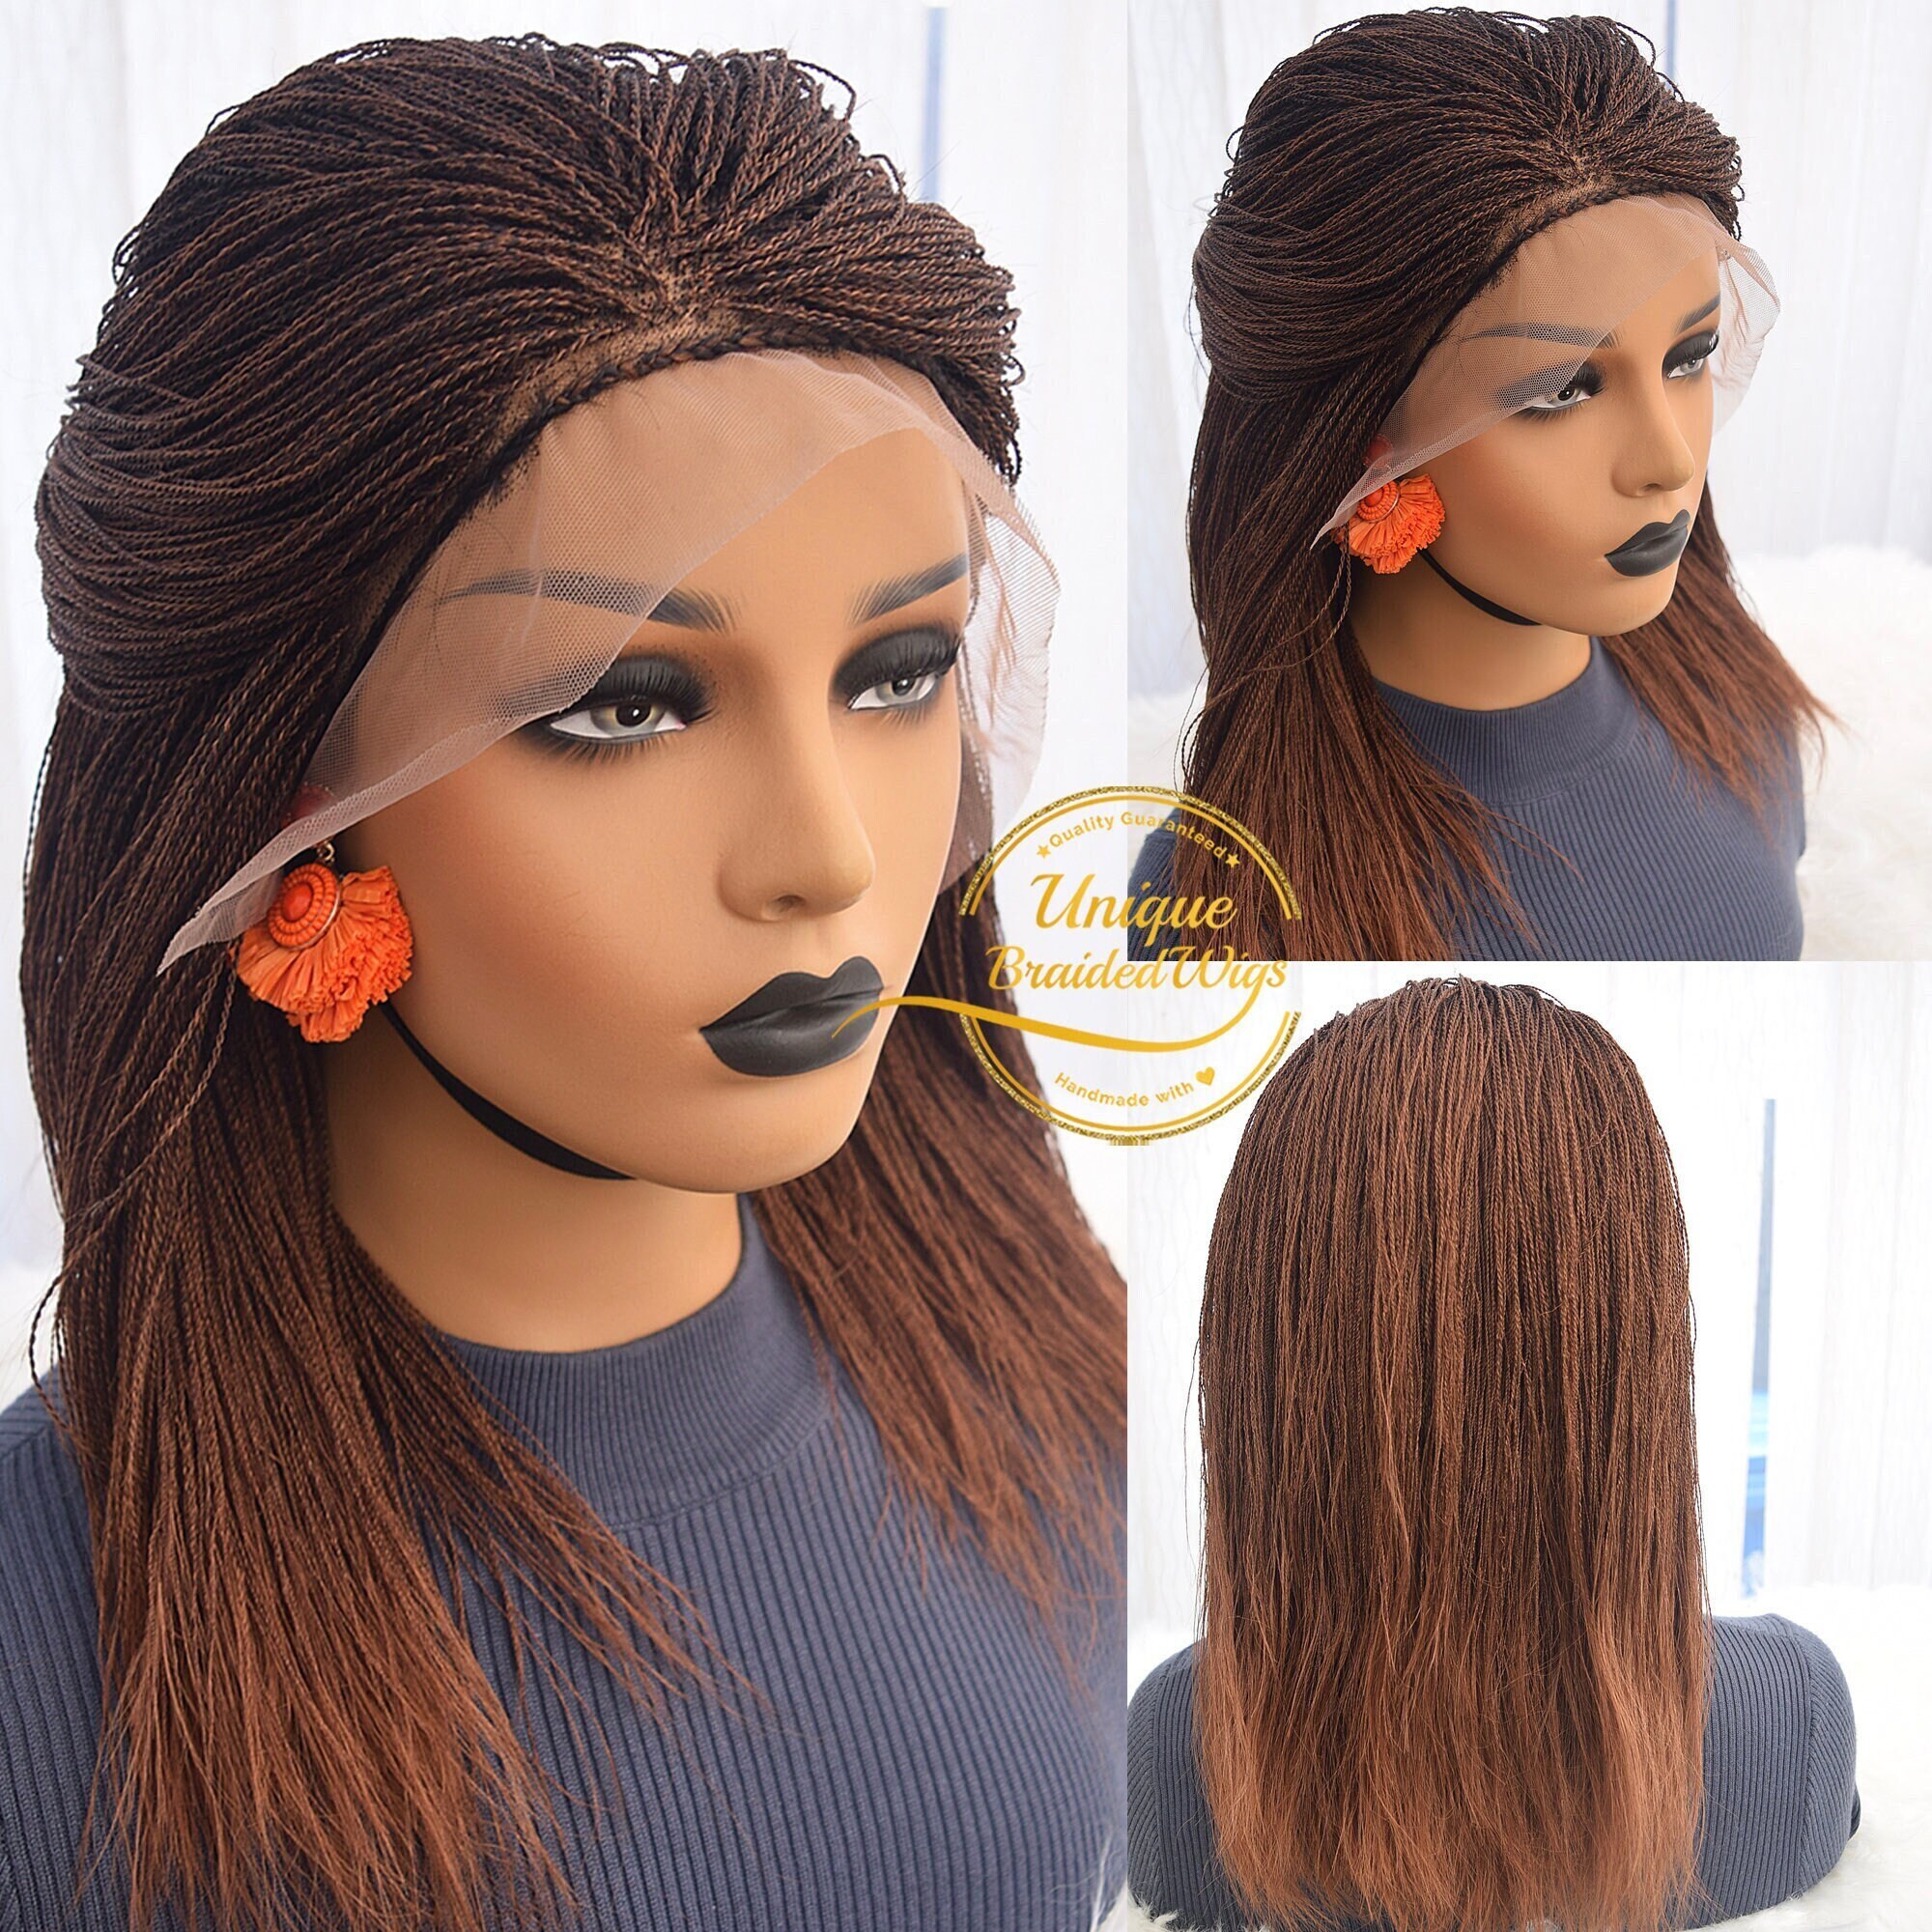 Braid Wigs, Senegalese Twists, Micro Twists, Braided Wig for Black Women,  Lace Front Braid Wig, Braided Wigs, Braid Lace Front Wigs,handmade 